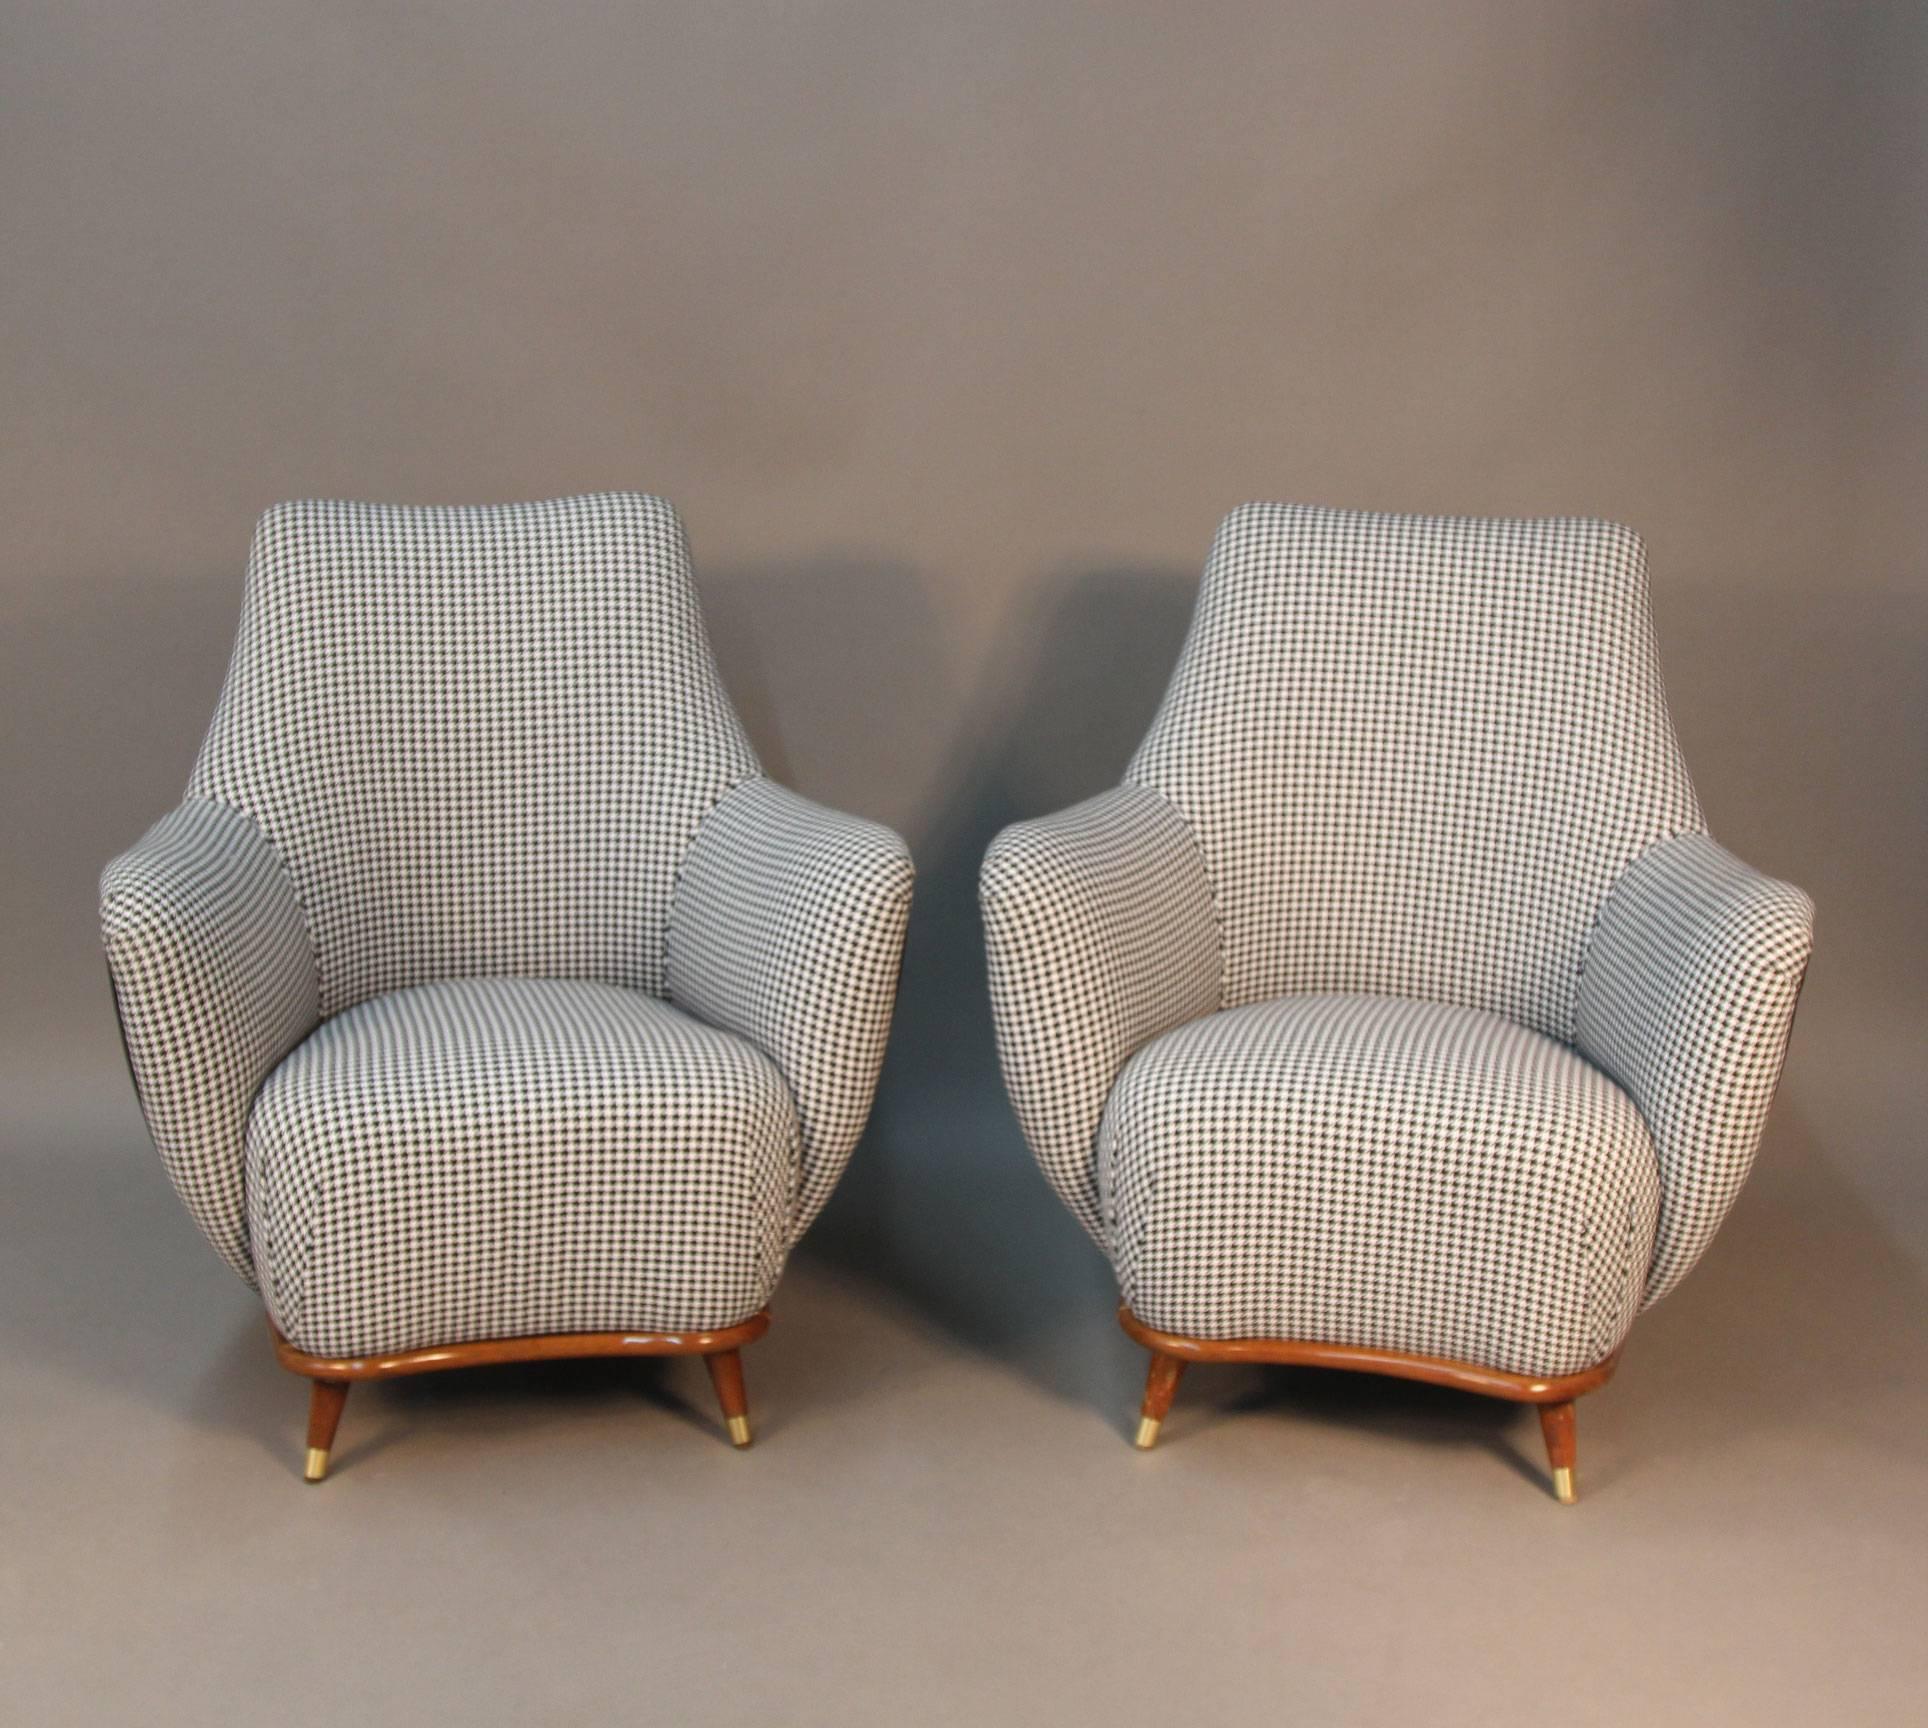 Pair of Gio Ponti style lounge chairs. Newly upholstered with houndstooth fabric on front and pleated black velvet on the back. Wood frame with new brass sabots.

Matching settee also available.